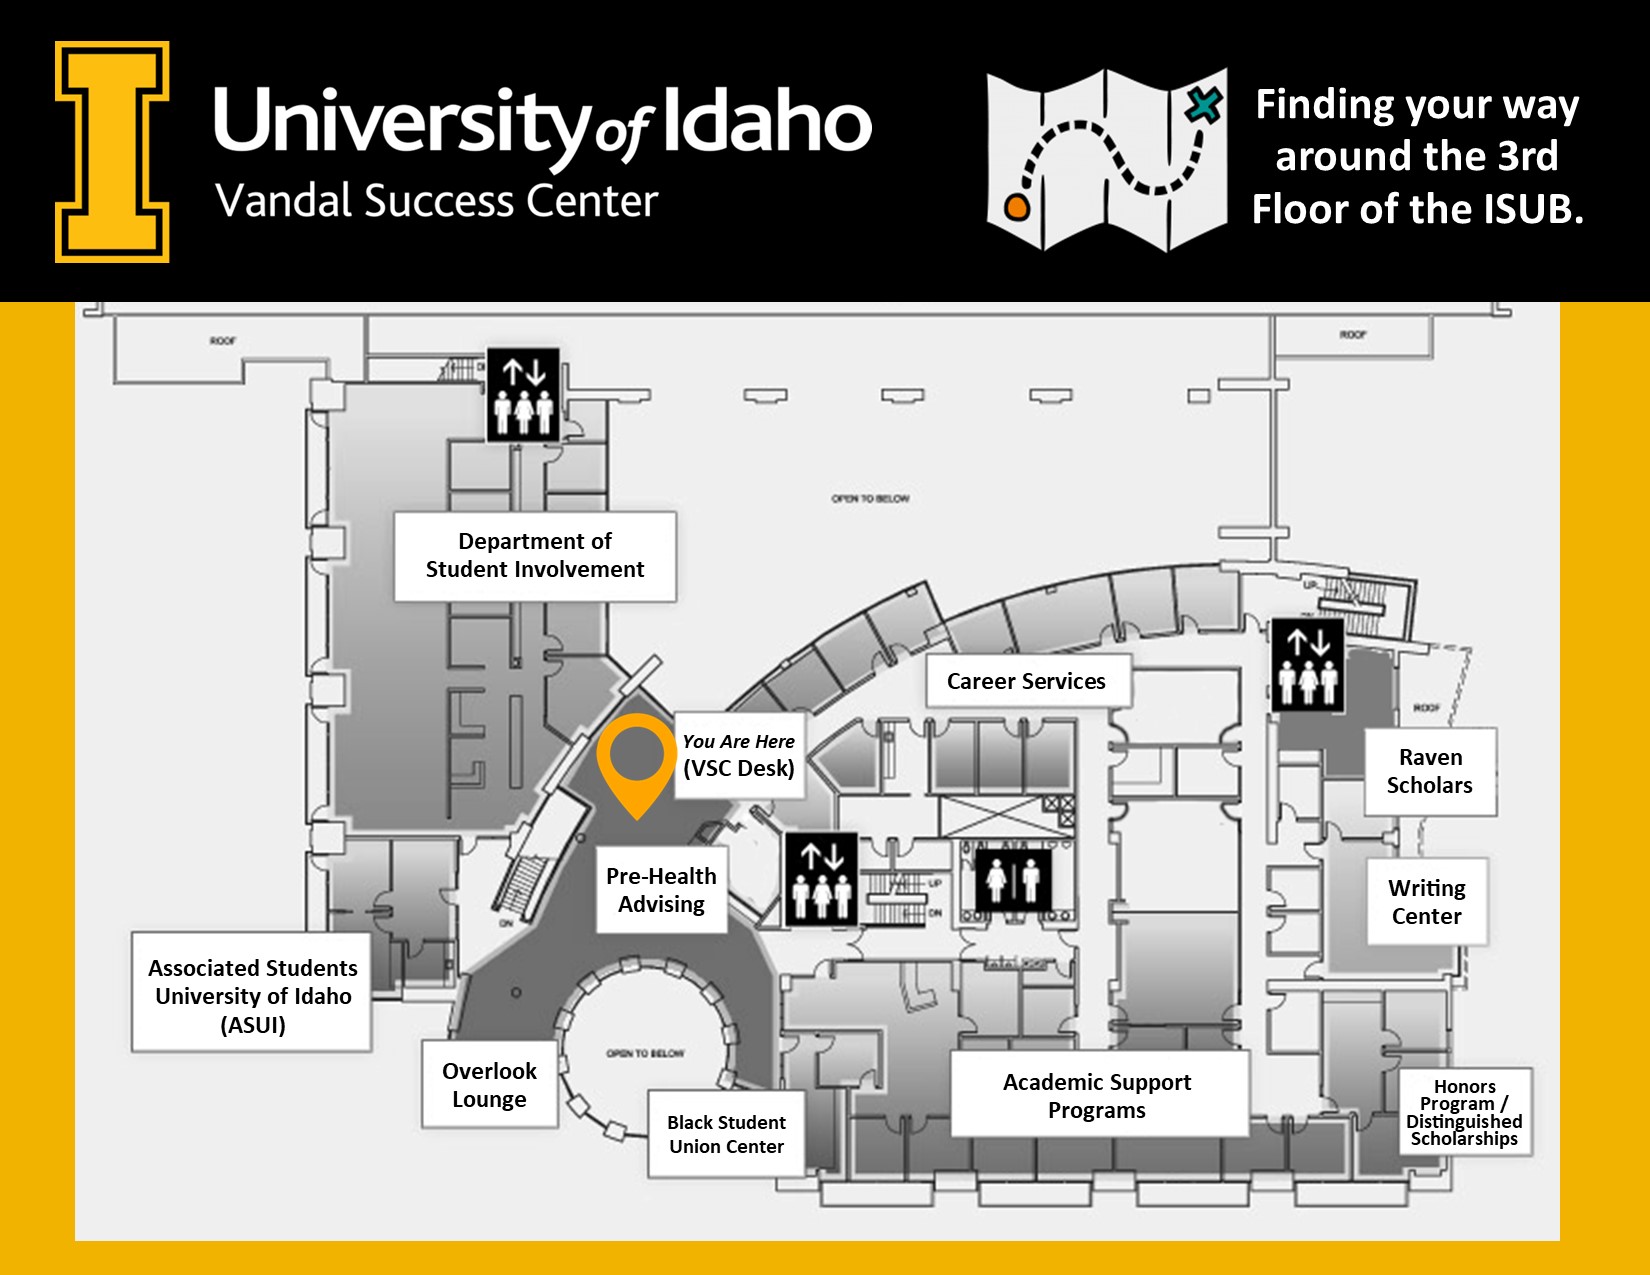 Map of the Vandal Success Center on the third floor of the Idaho Student Union